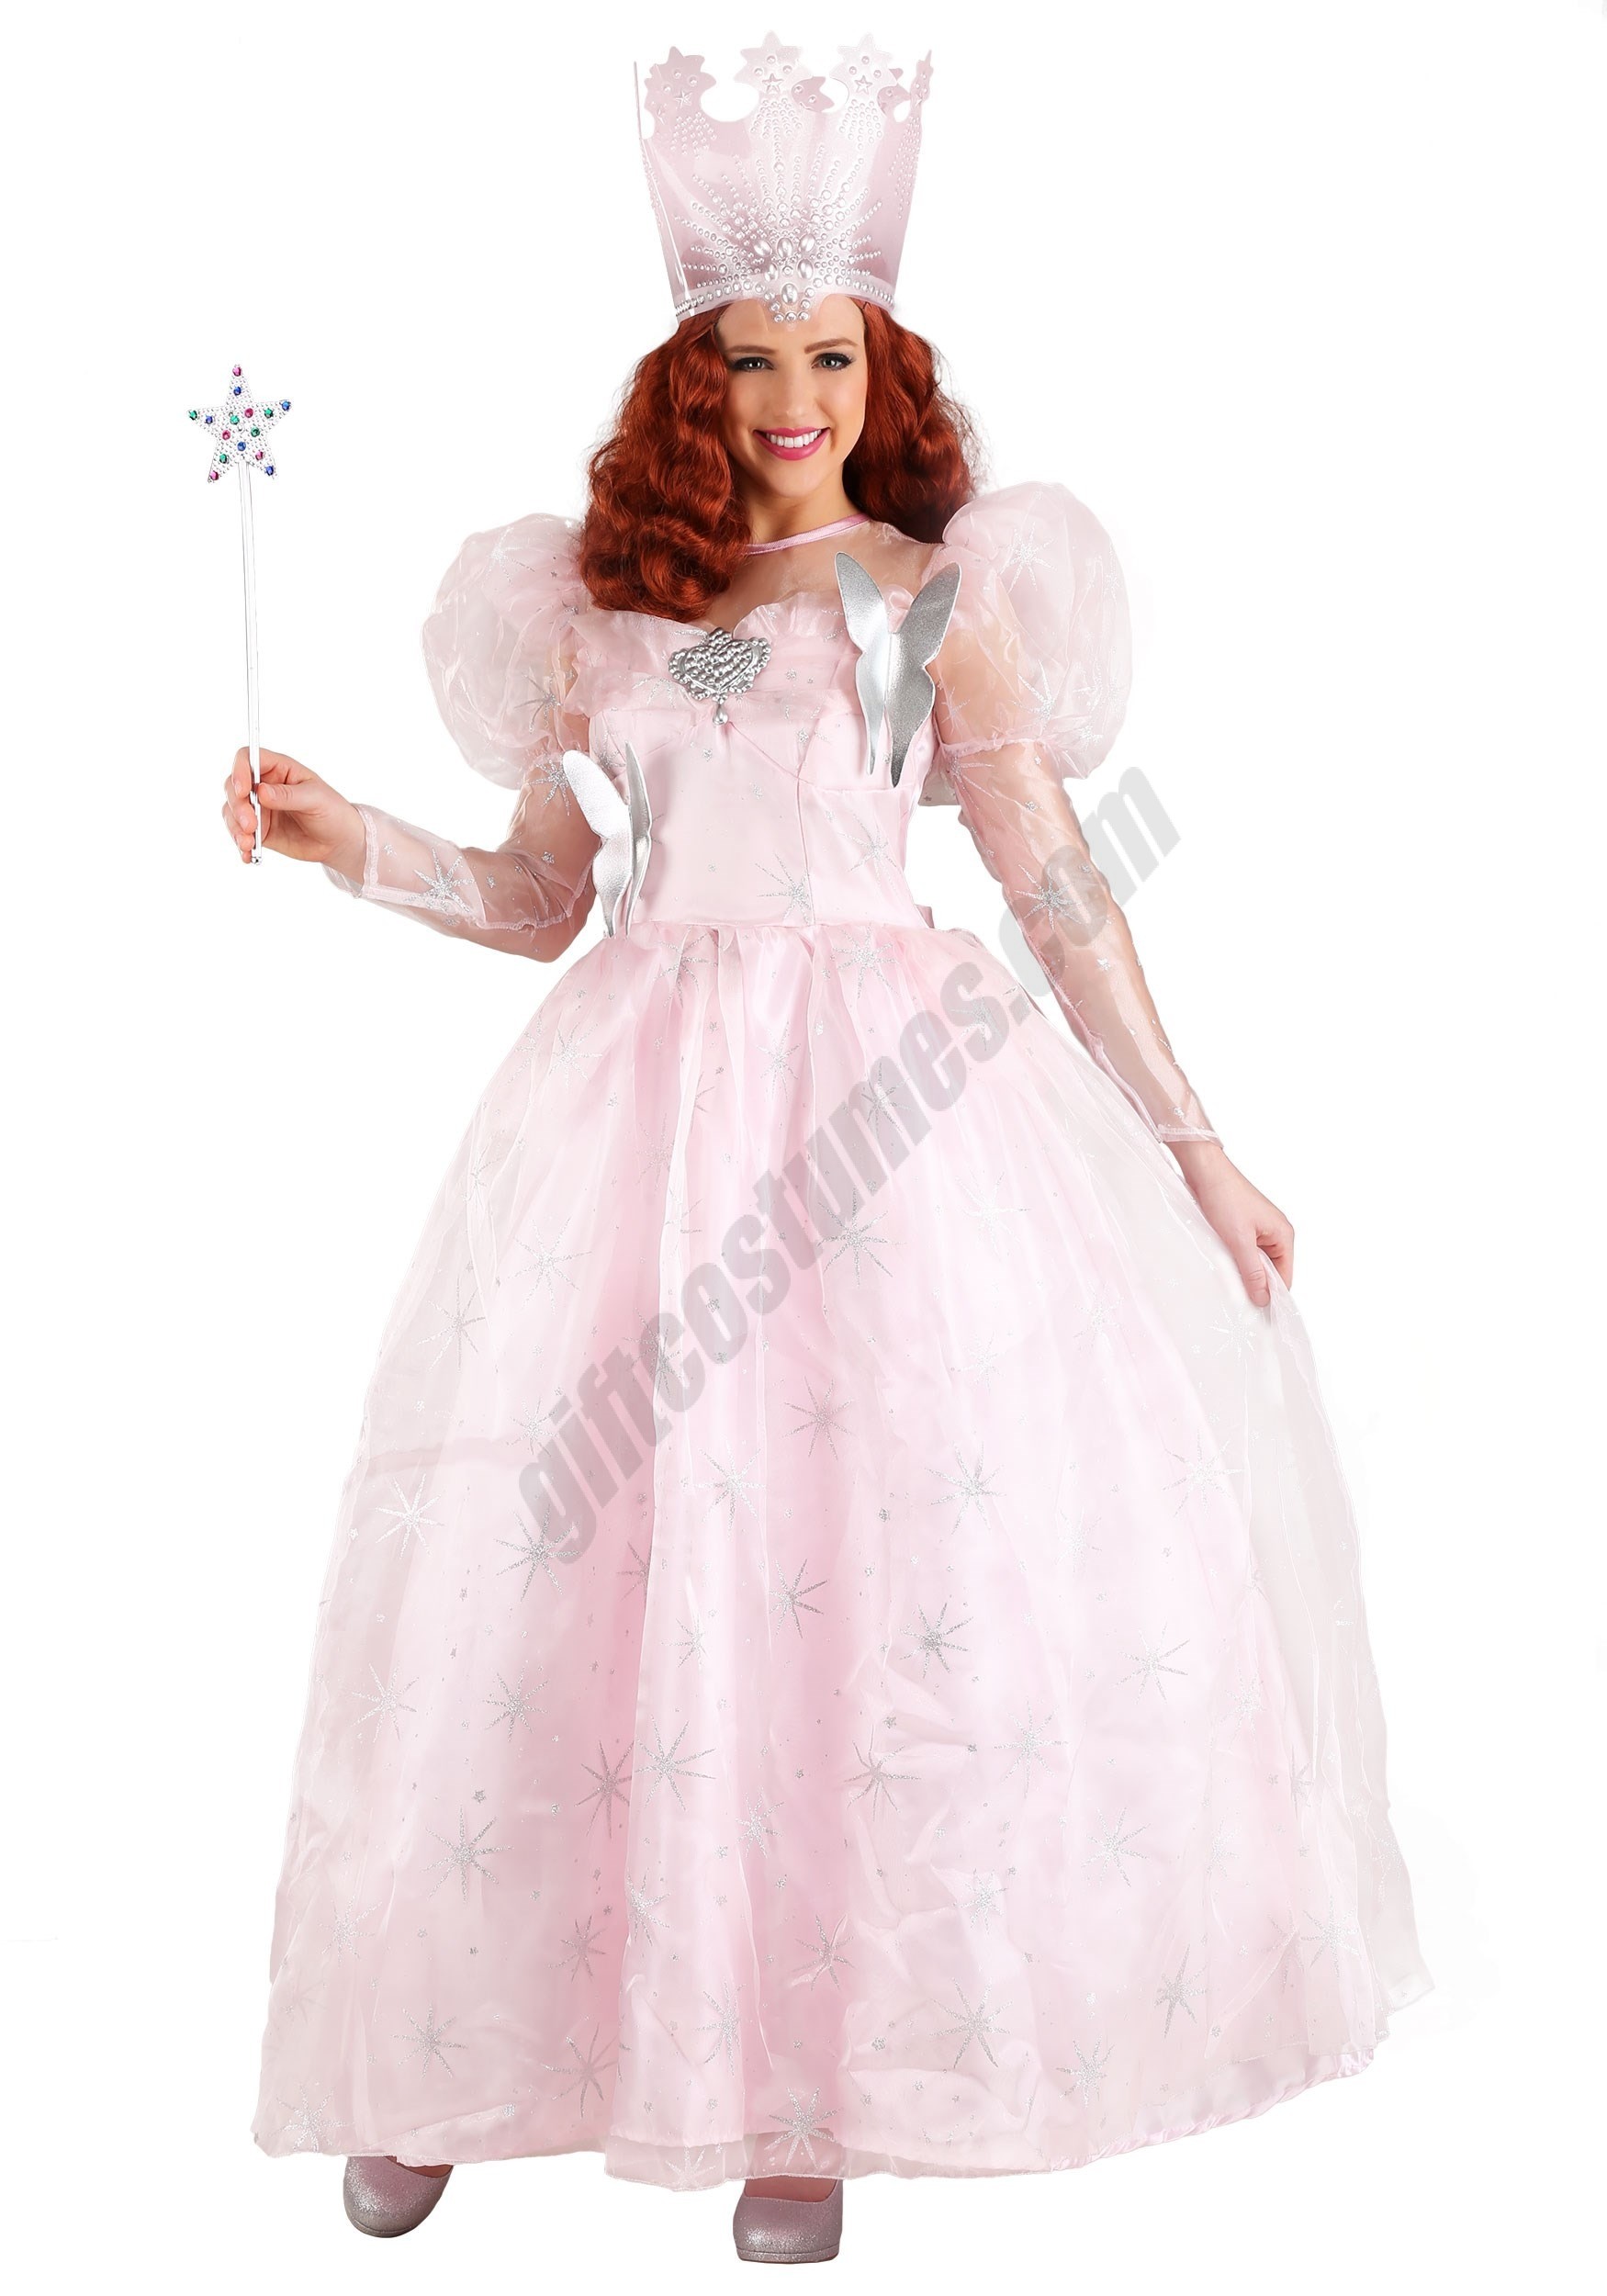 Deluxe Wizard of Oz Glinda the Good Witch Plus Size Women's Costume - Deluxe Wizard of Oz Glinda the Good Witch Plus Size Women's Costume